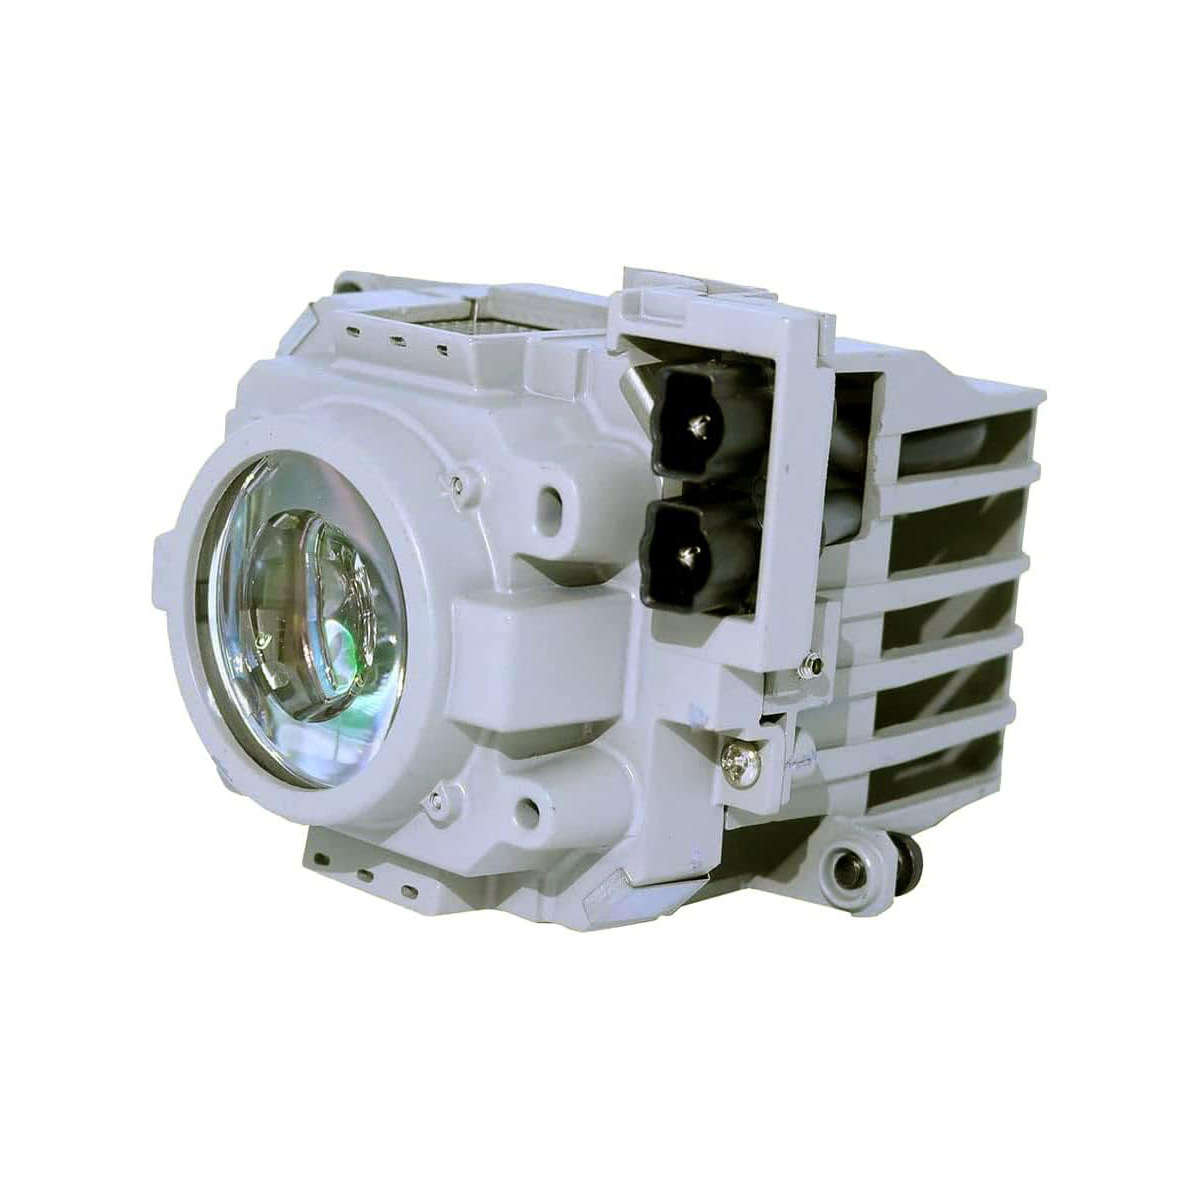 Replacement Projector lamp 003-100857-02 For CHRISTIE HD10K-M/S+1 0K-M/ WU12K-M